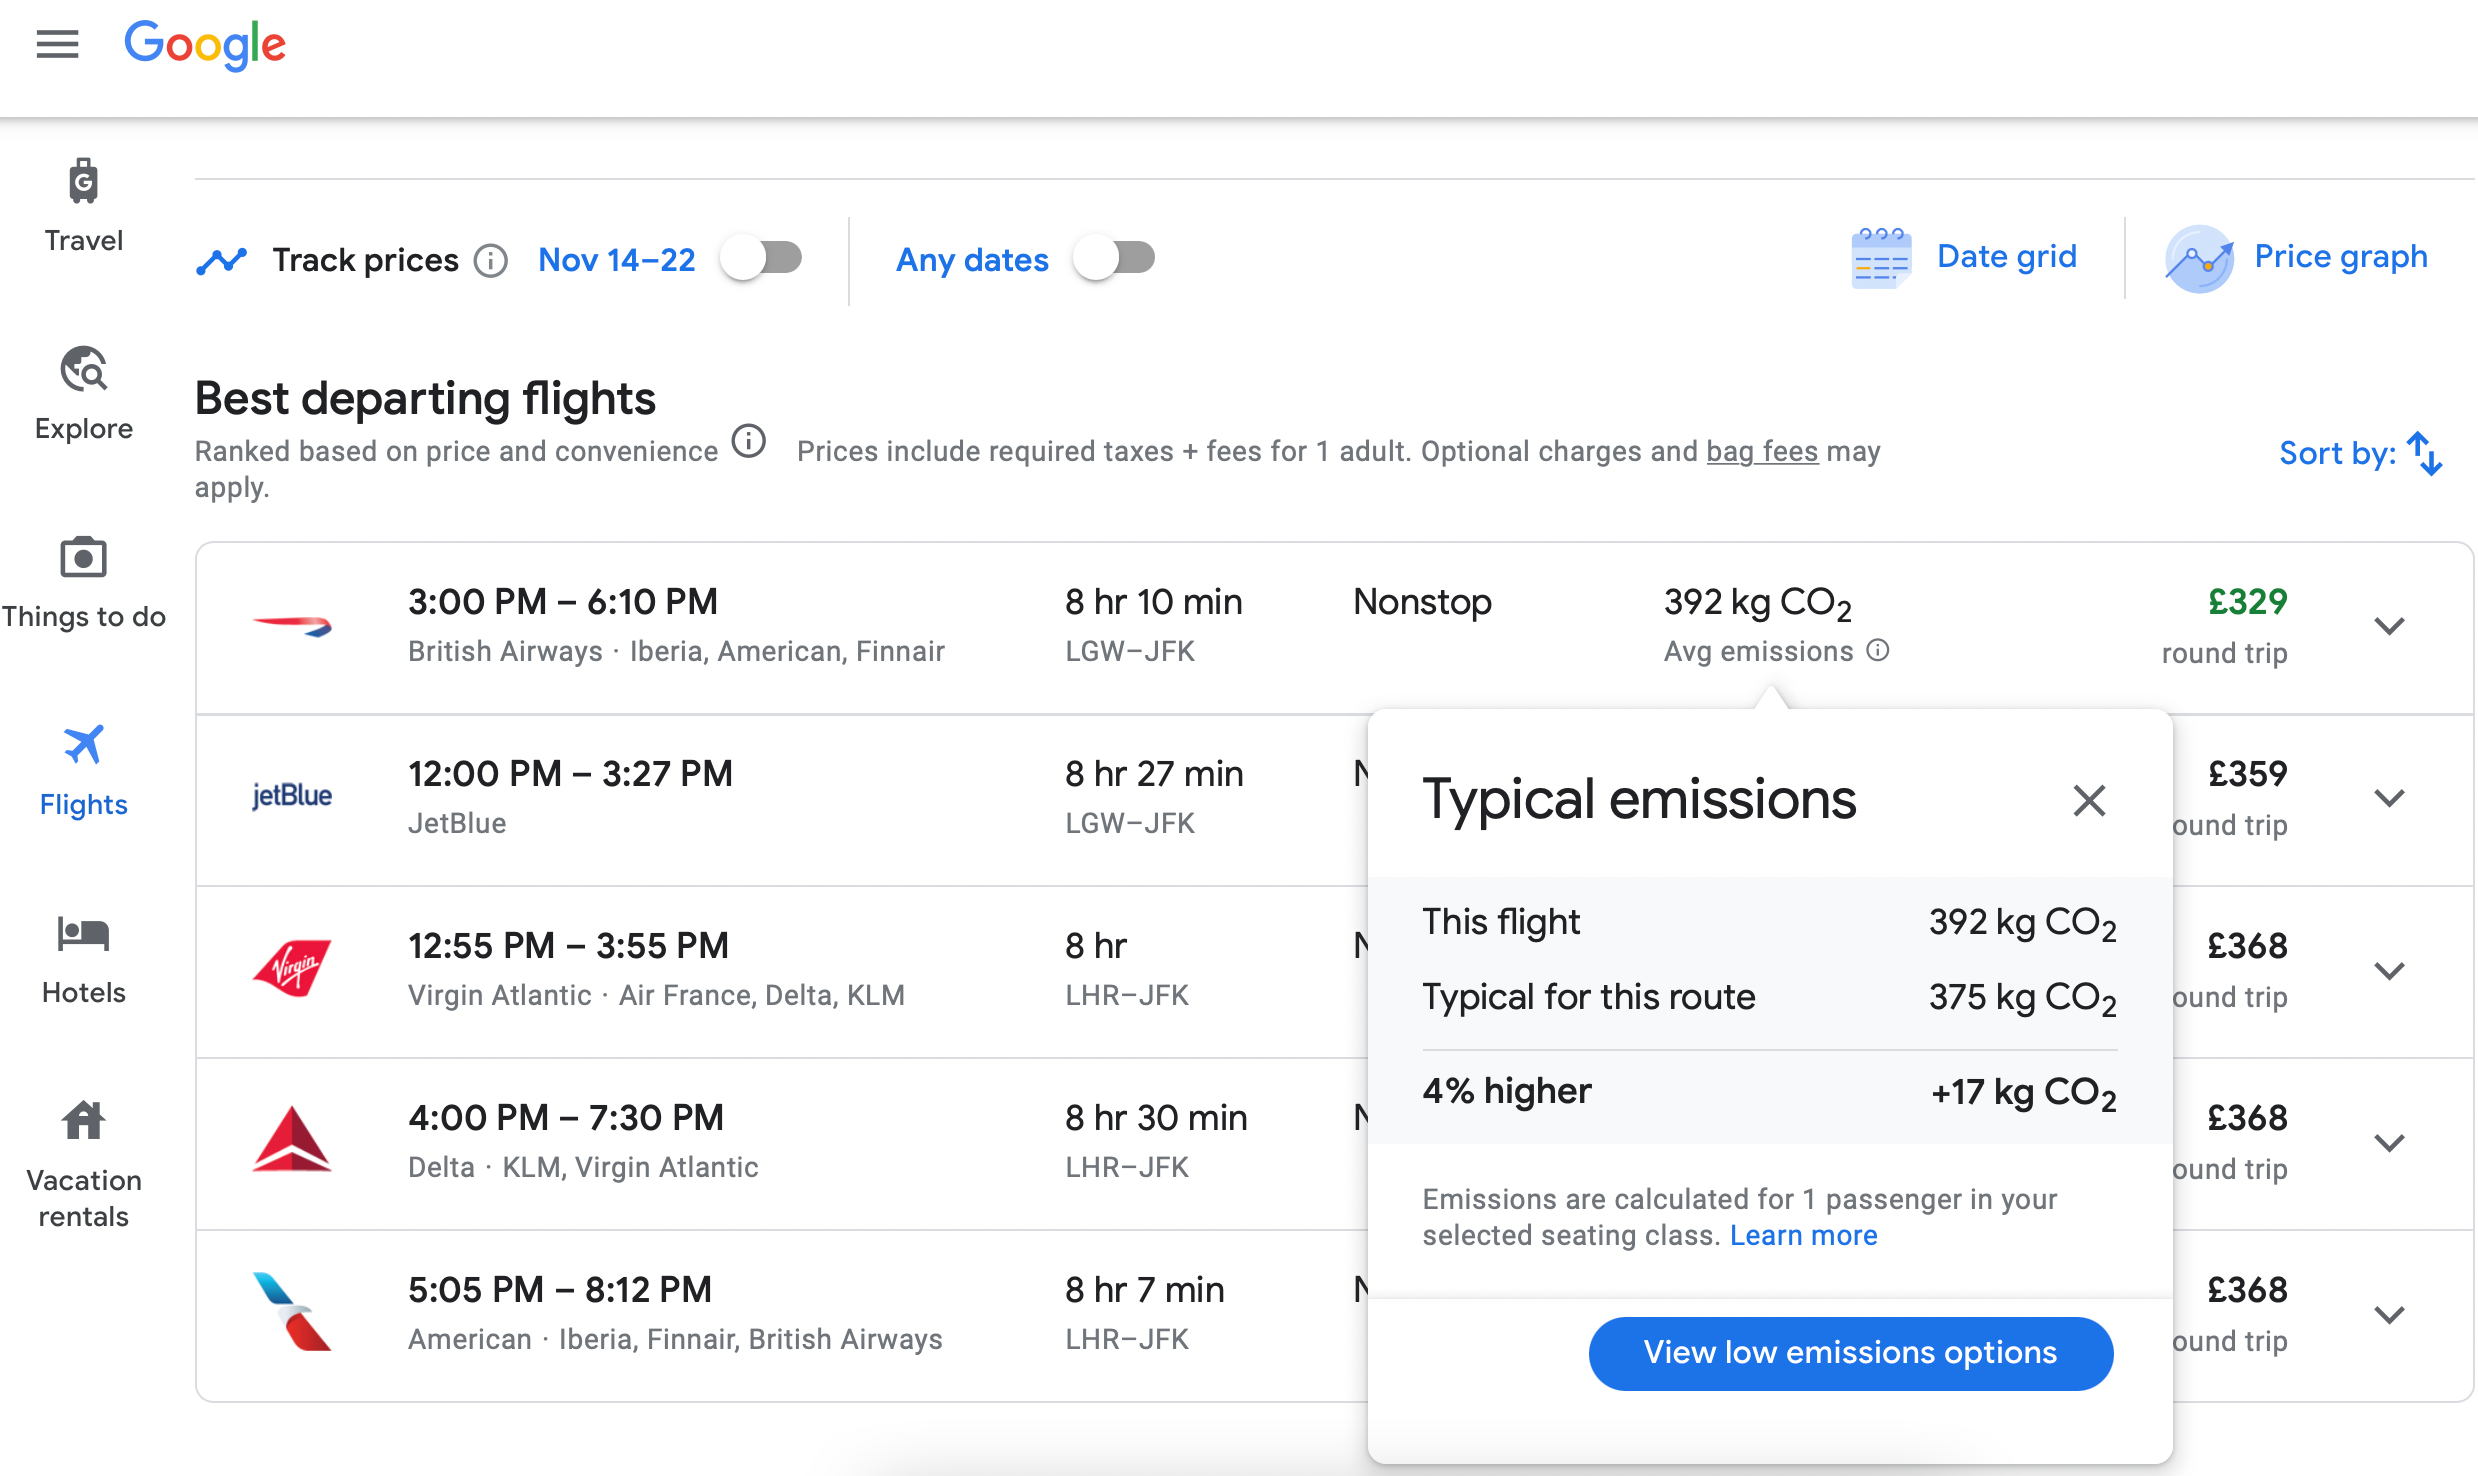 Google showing typical CO2 emissions of a flight from London to New York